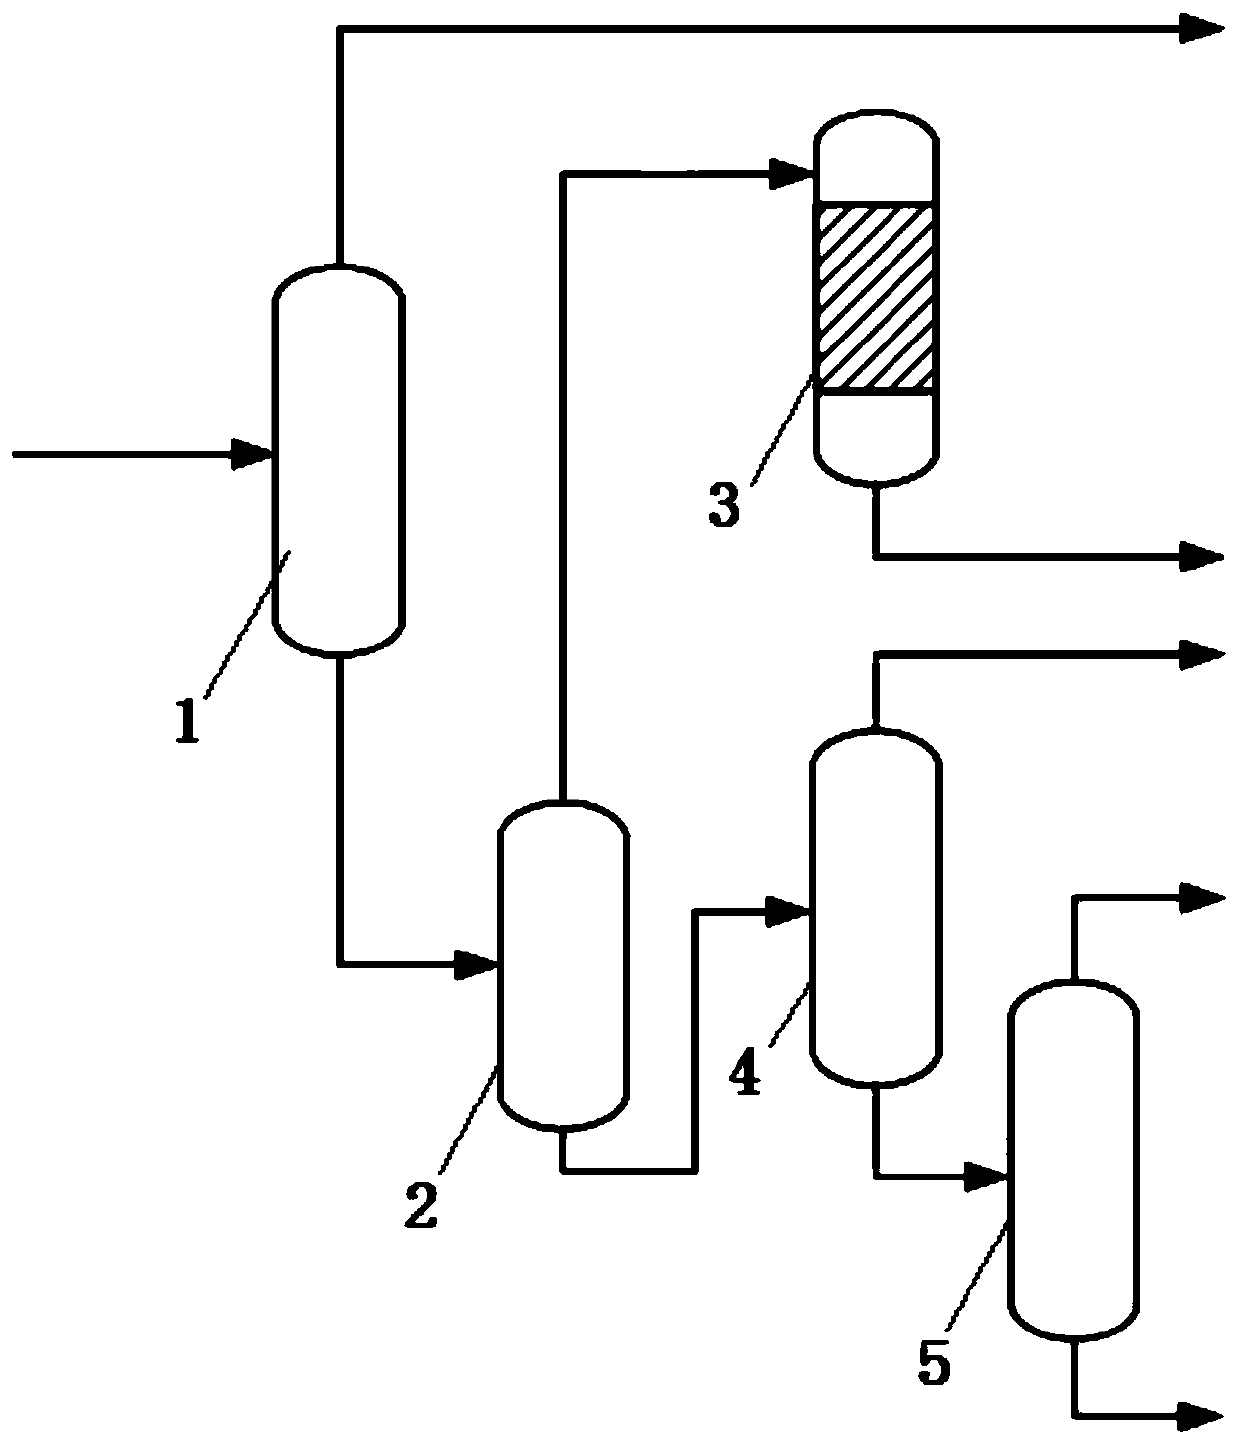 System and method used to produce lubricating oil base oil and high melting point Fischer-Tropsch wax